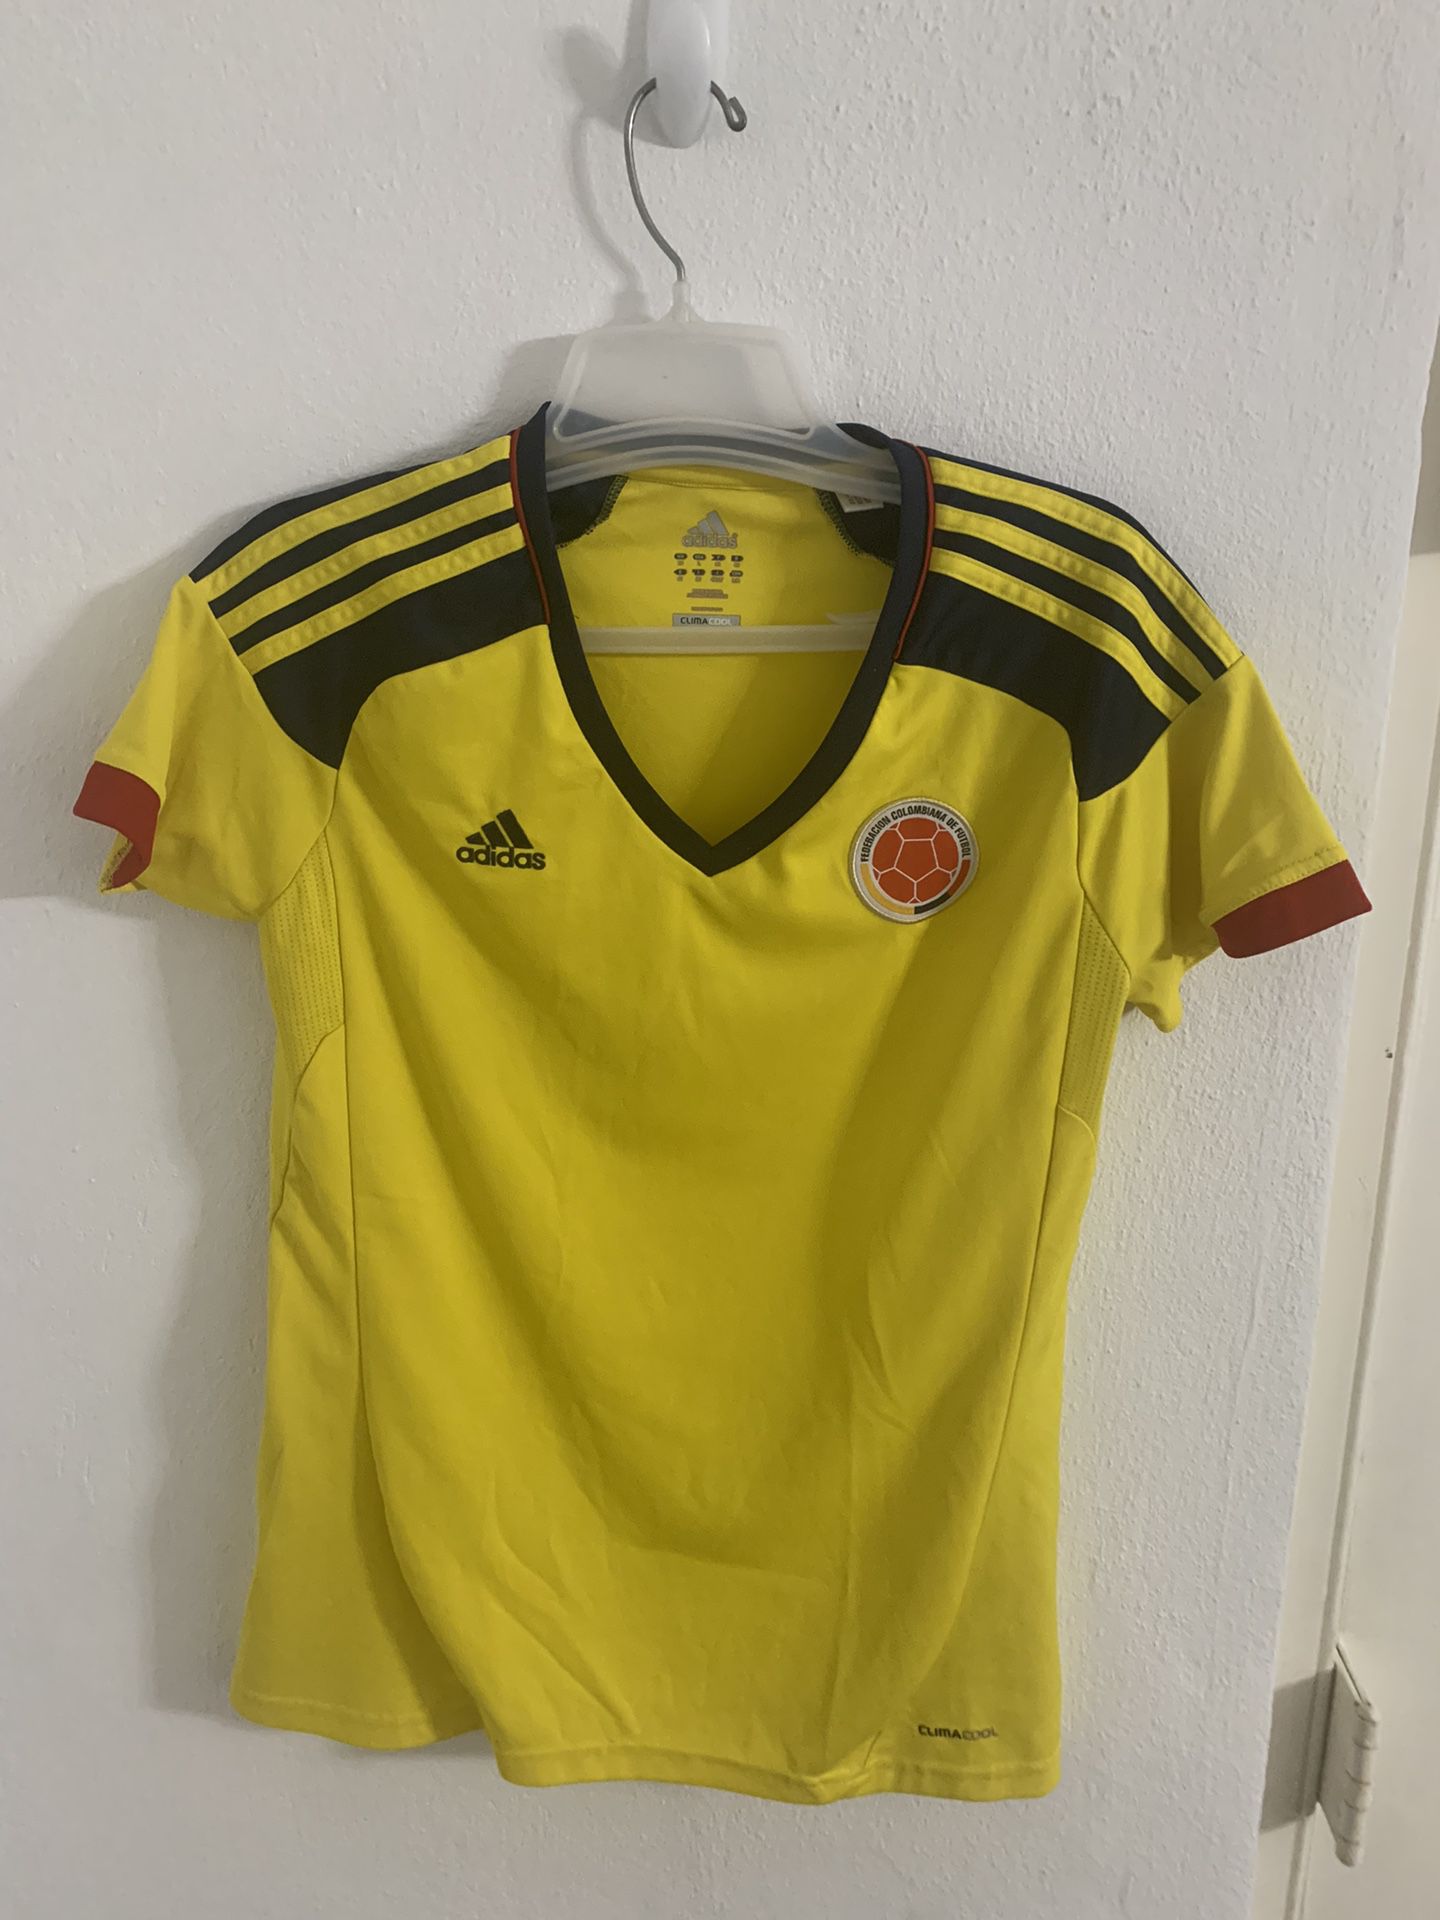 WOMENS COLOMBIA NATIONAL TEAM JERSEY SIZE M 